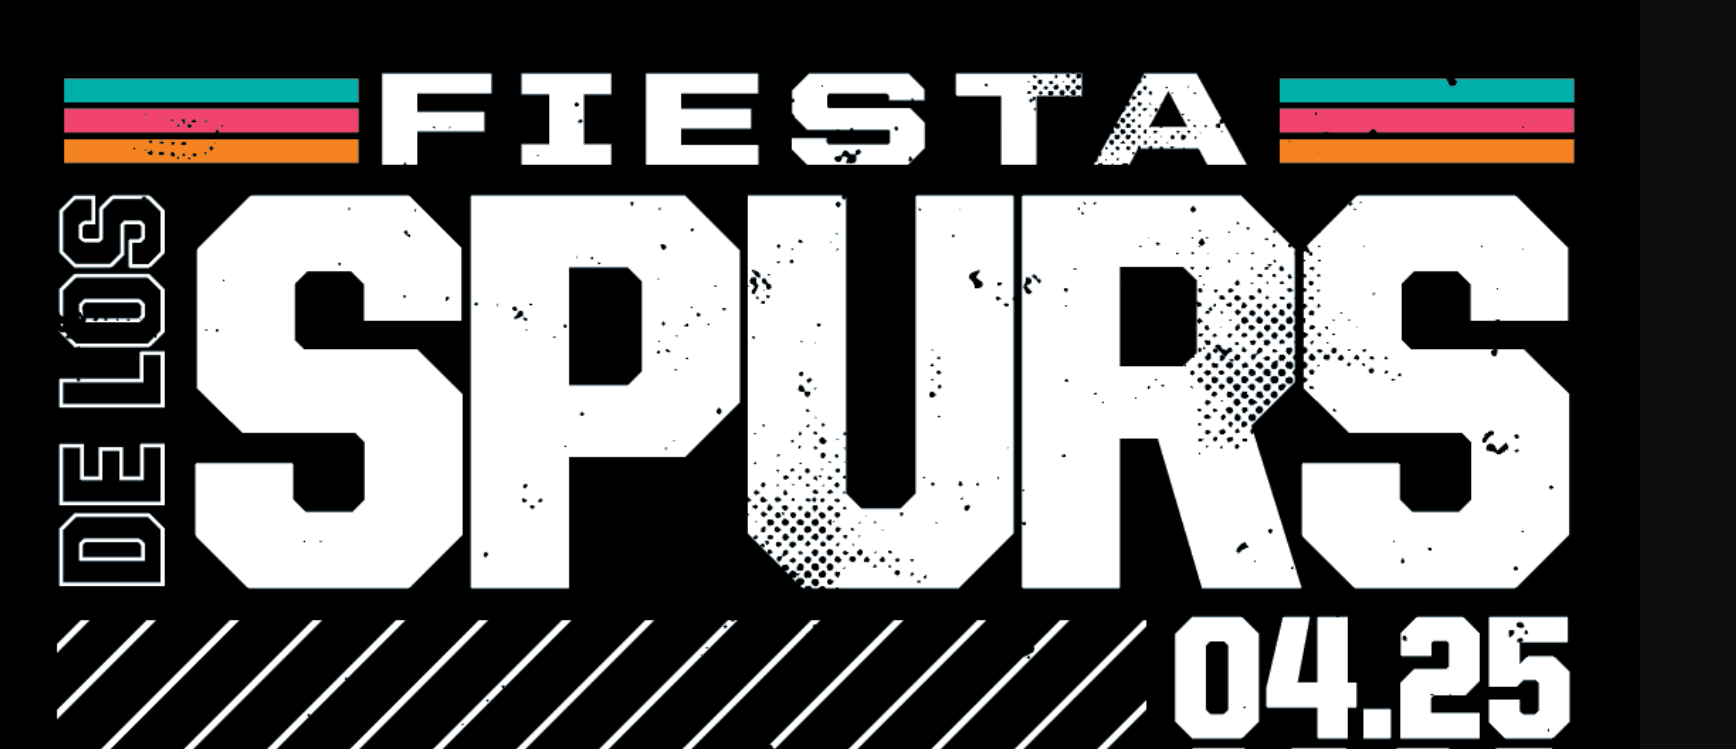 Spurs take a walk down memory lane with launch of the “Fiesta